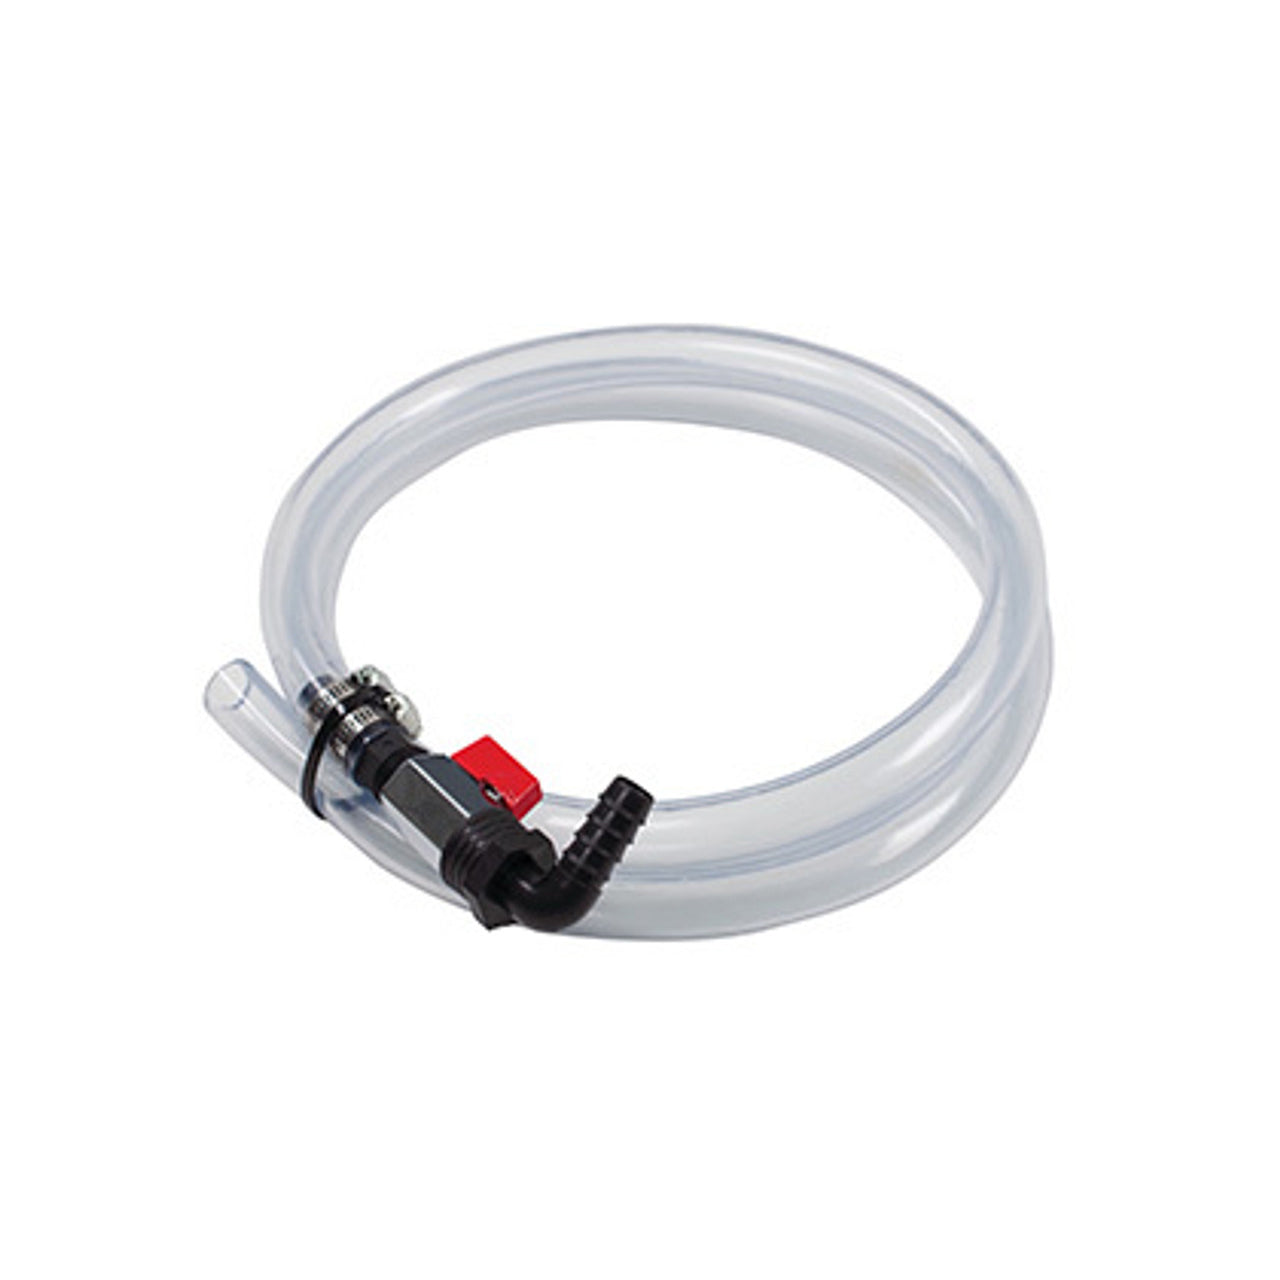 1.5M PLASTIC WATER HOSE KIT – CONNECTS TO NIPPLE OUTLET ON WATER TANKS